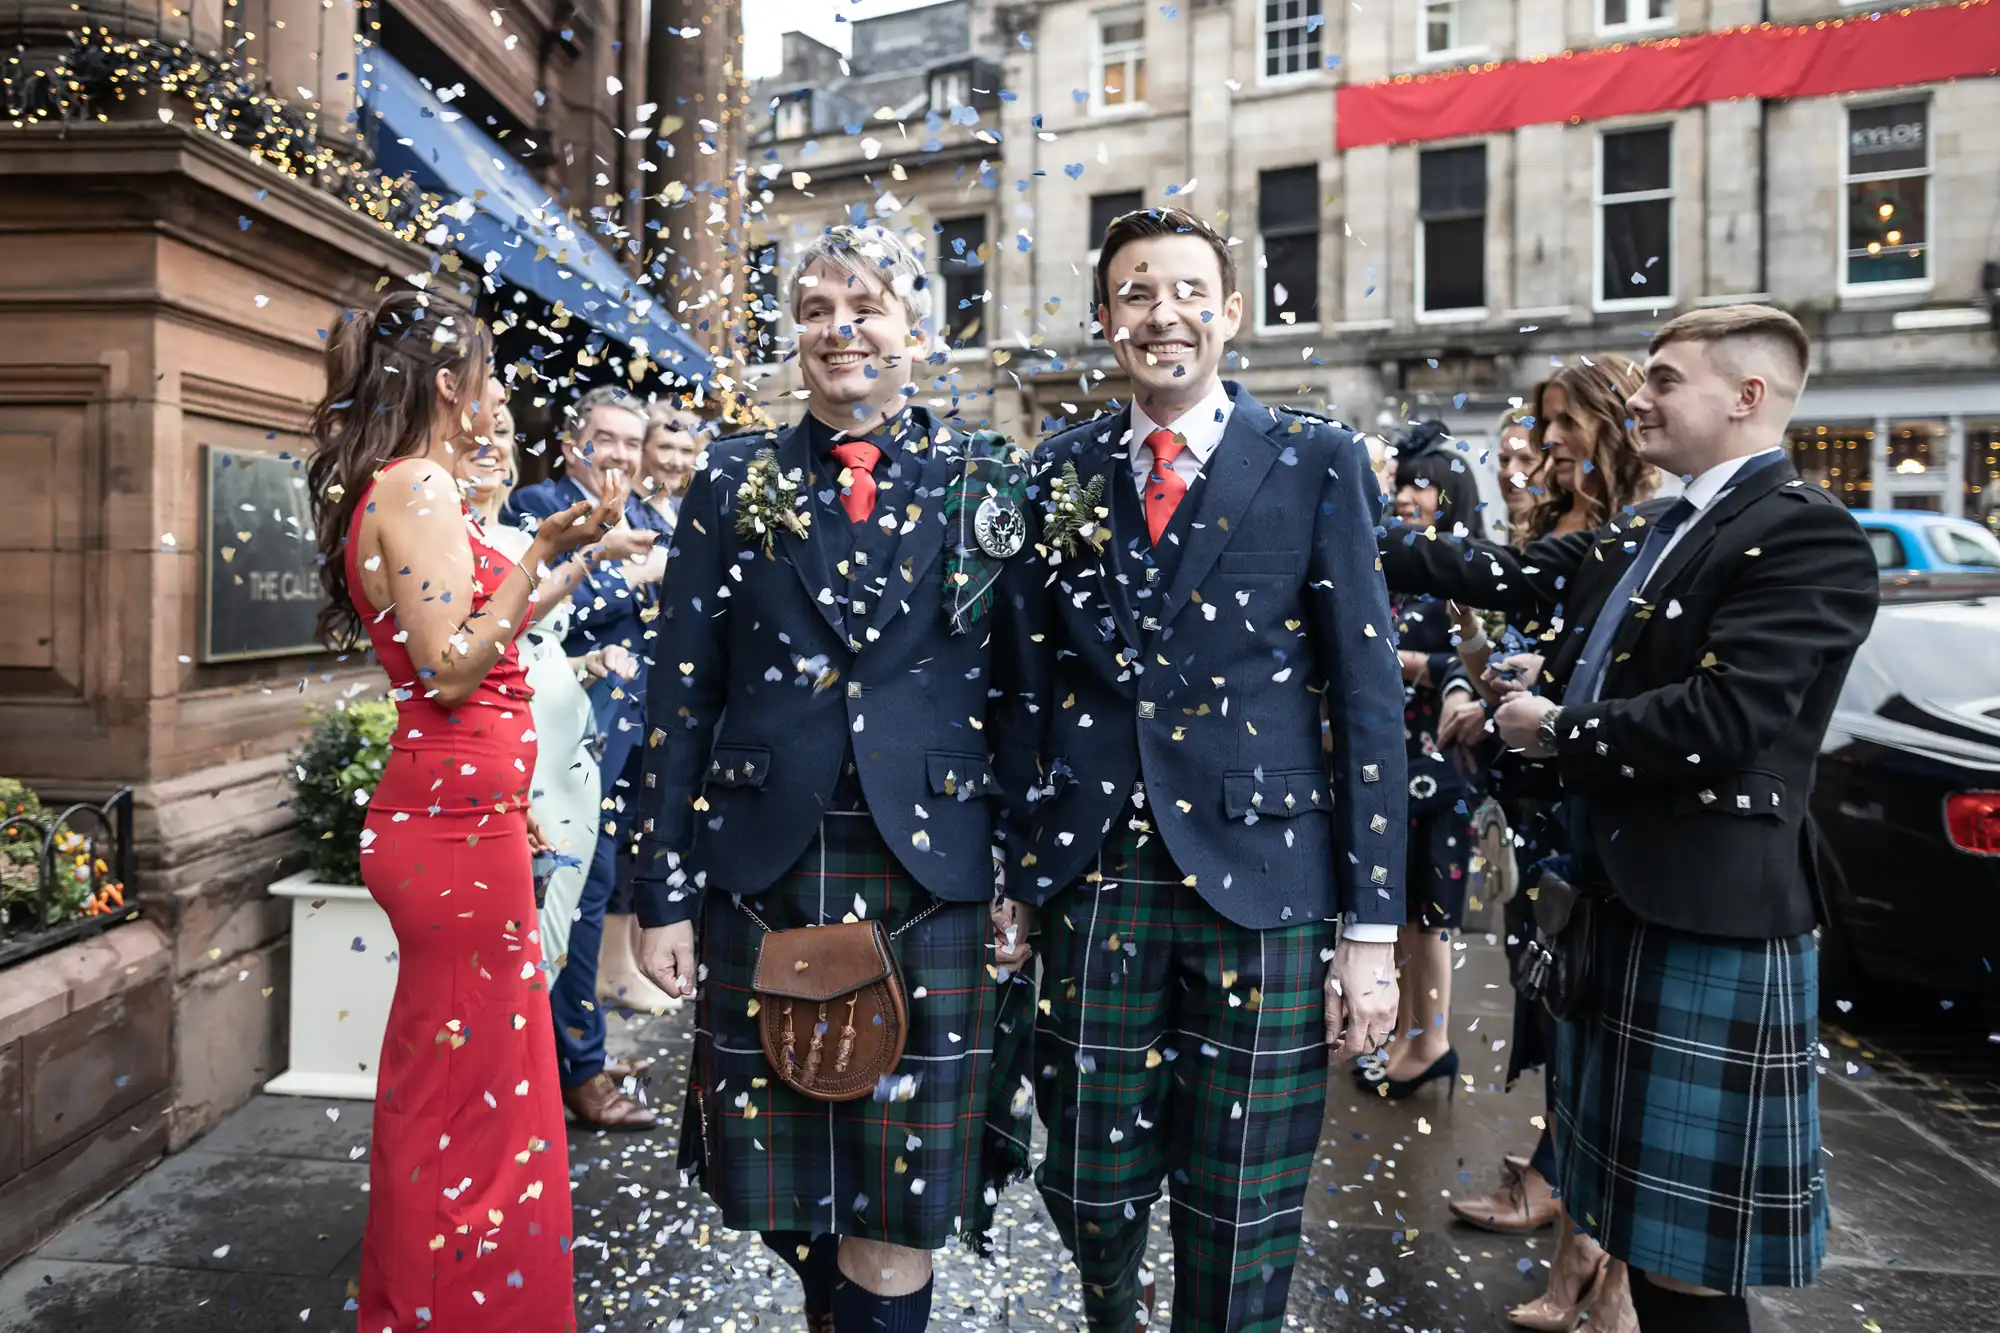 Two men in kilts walk hand in hand under a shower of confetti, surrounded by smiling guests dressed in formal attire. A woman in a red dress stands nearby. They appear to be celebrating a special occasion.